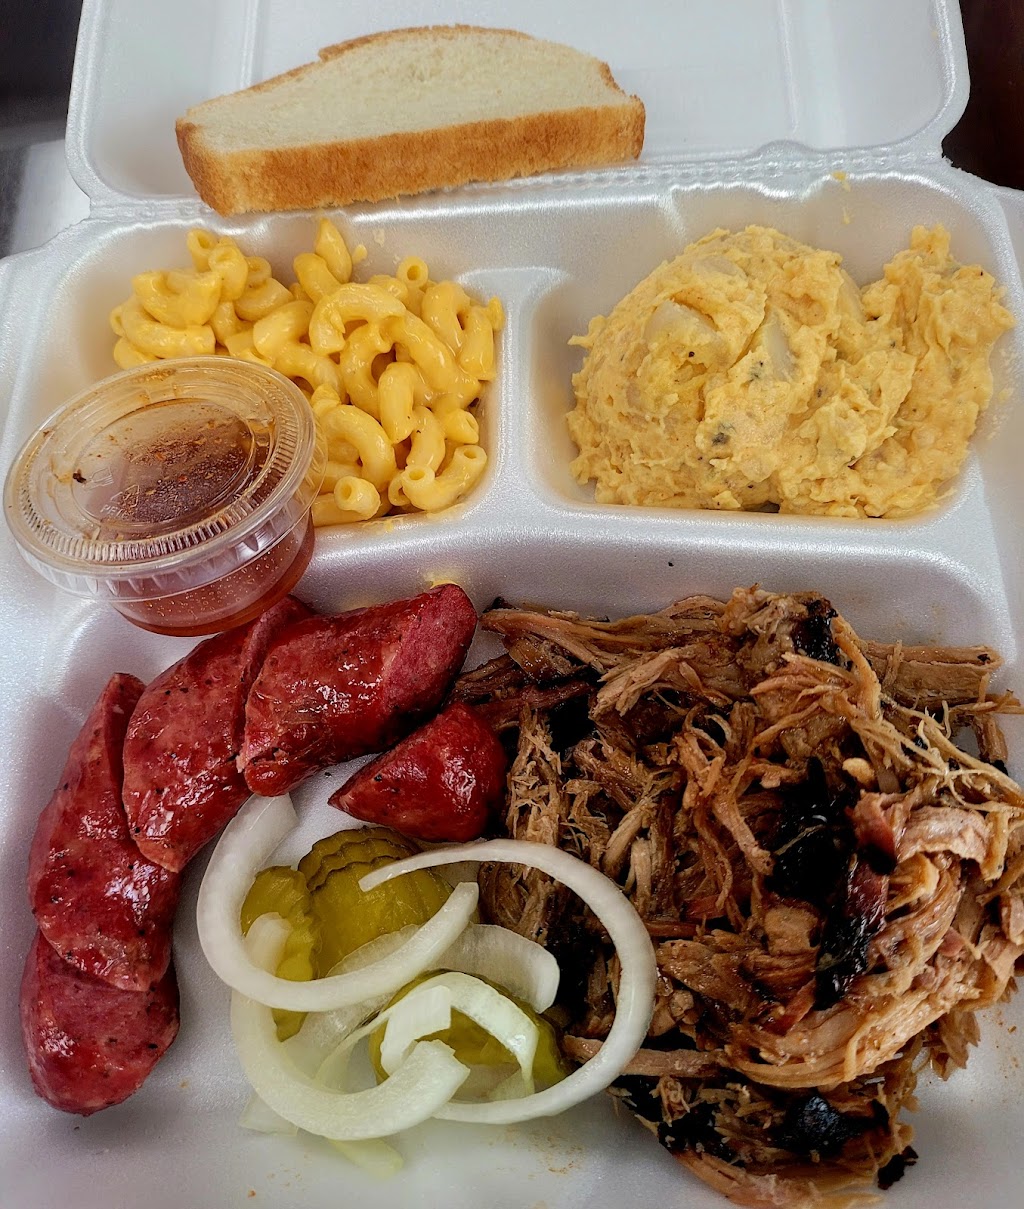 Smokin’ Dick’s Barbecue | restaurant | 114 W 4th St, Post, TX 79356, USA | 8065433767 OR +1 806-543-3767